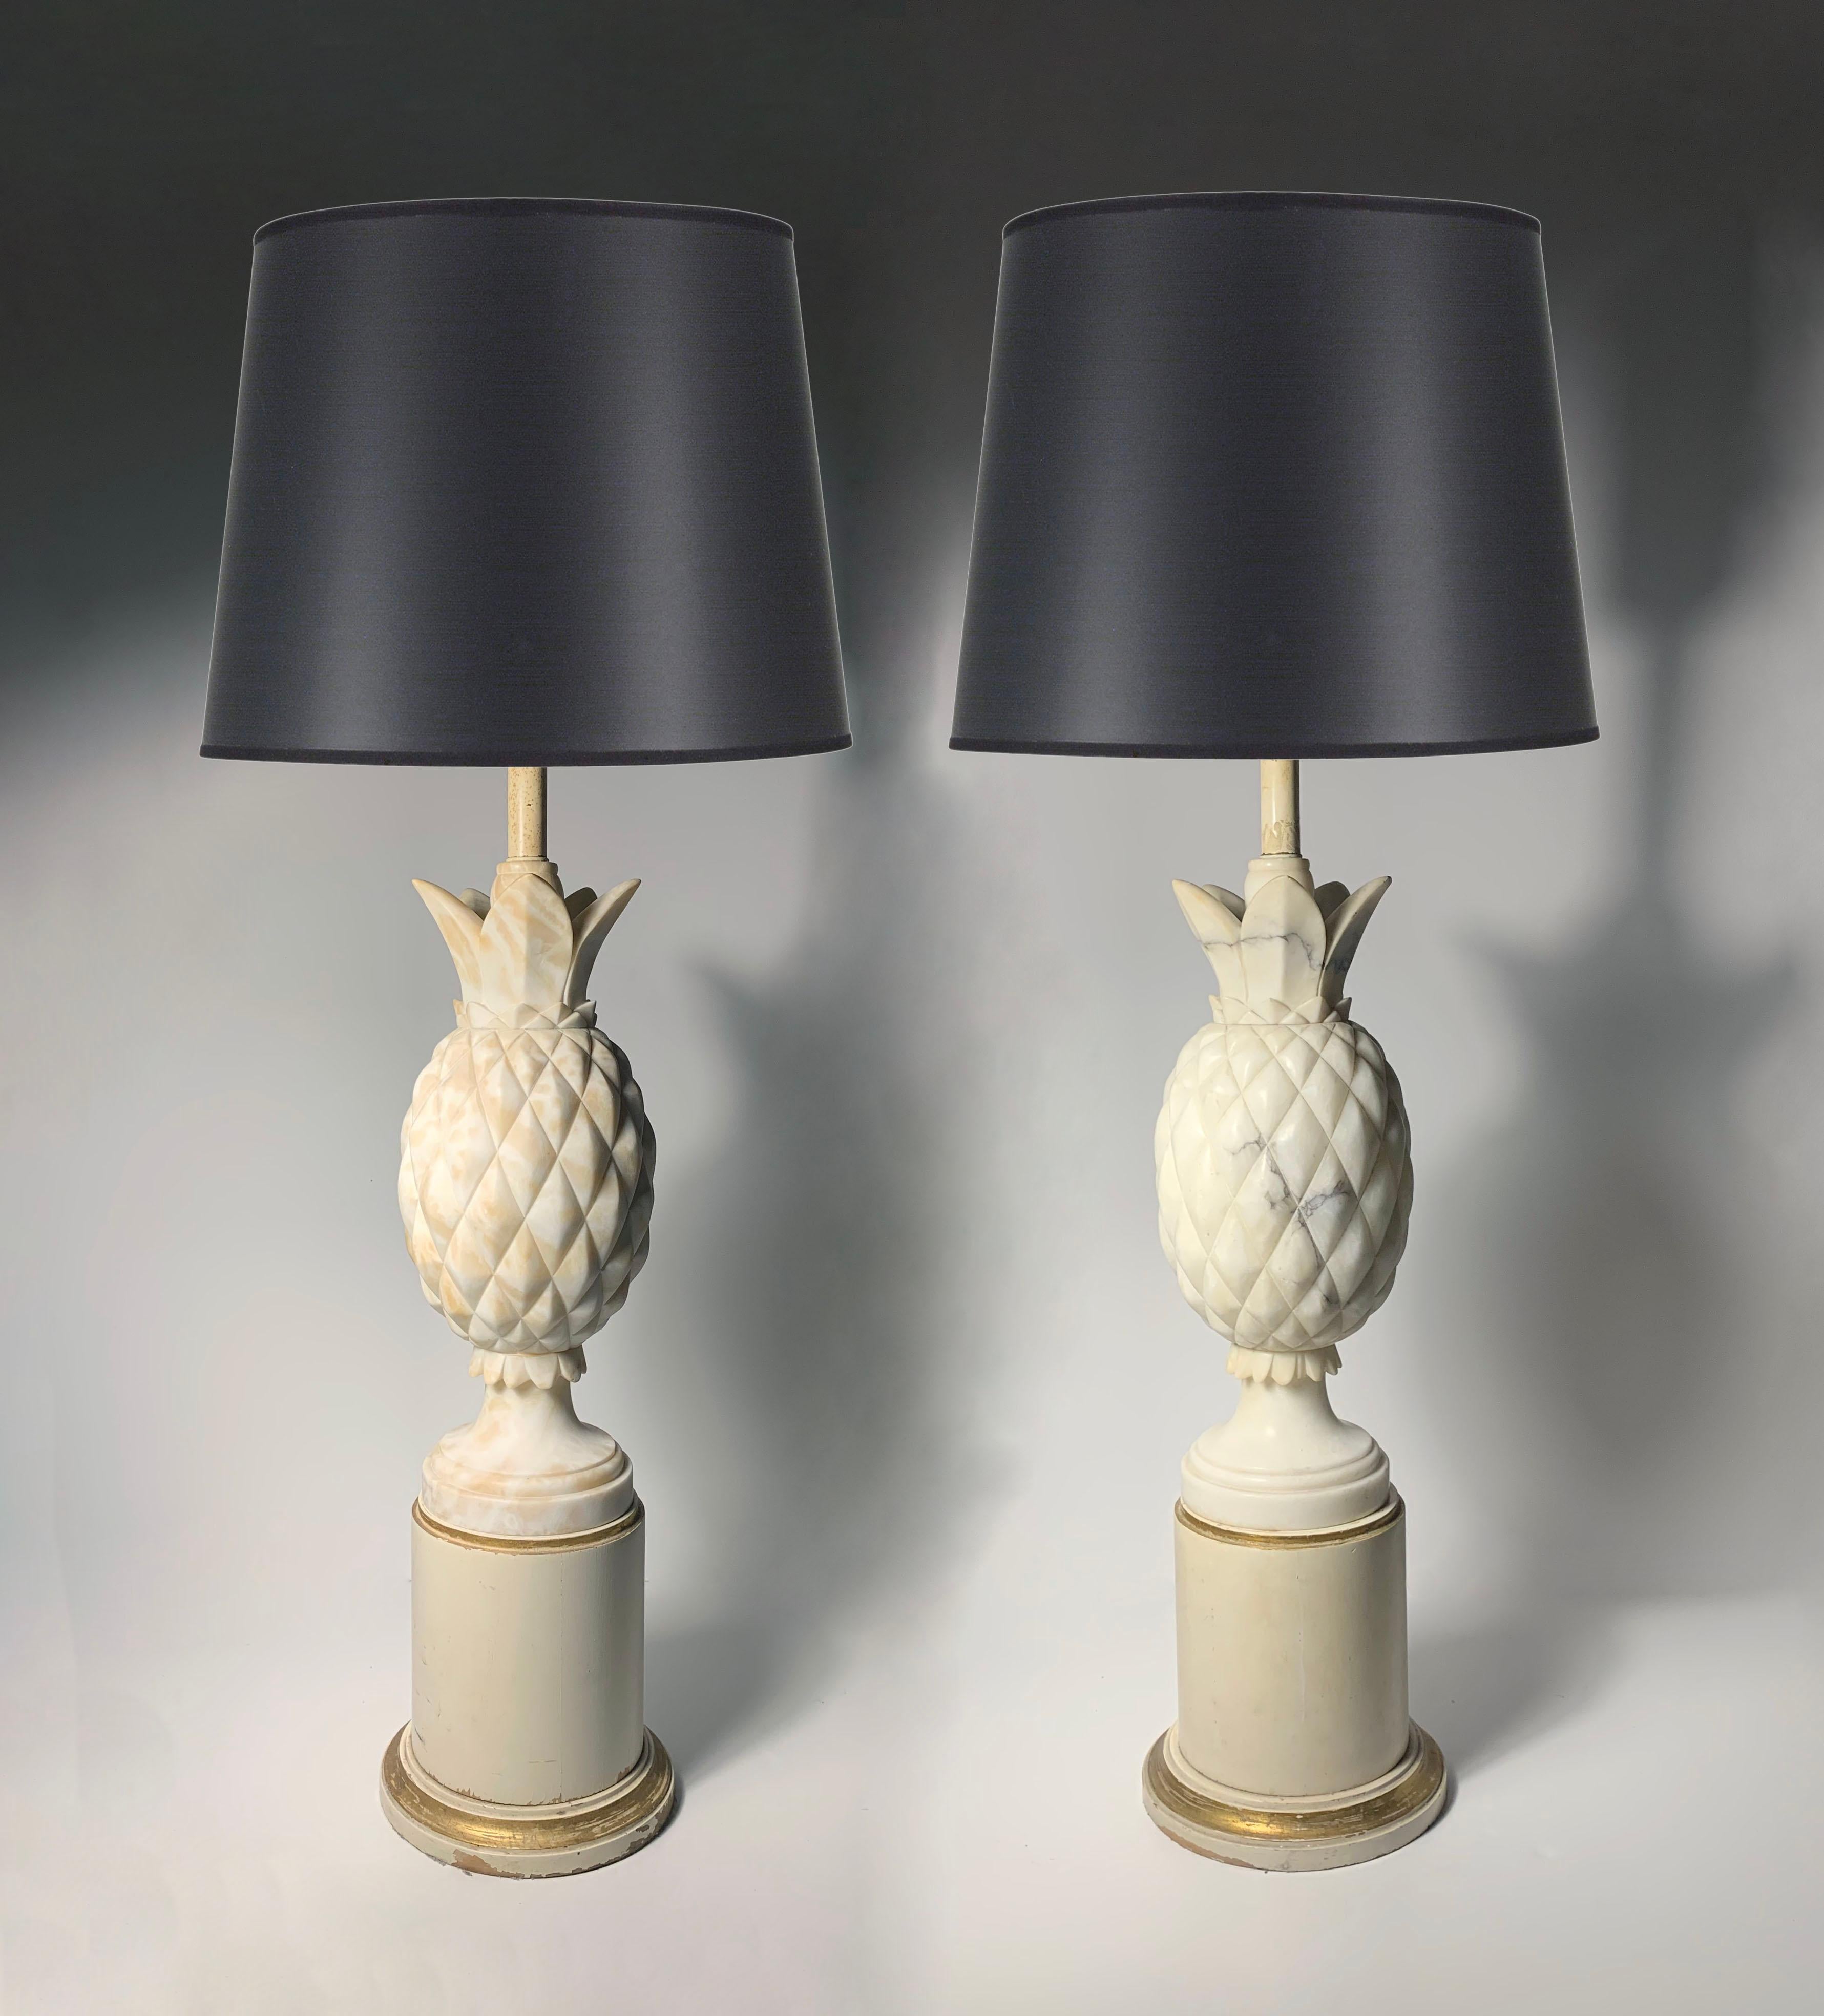 Vintage Pair of Italian Marble Pineapple Lamps. Not exactly sure of the material. Assuming it is Marble or Alabaster. Or possibly one is Marble and one is Alabaster.  The possible Alabaster one shows light tan areas that are either from agie, or